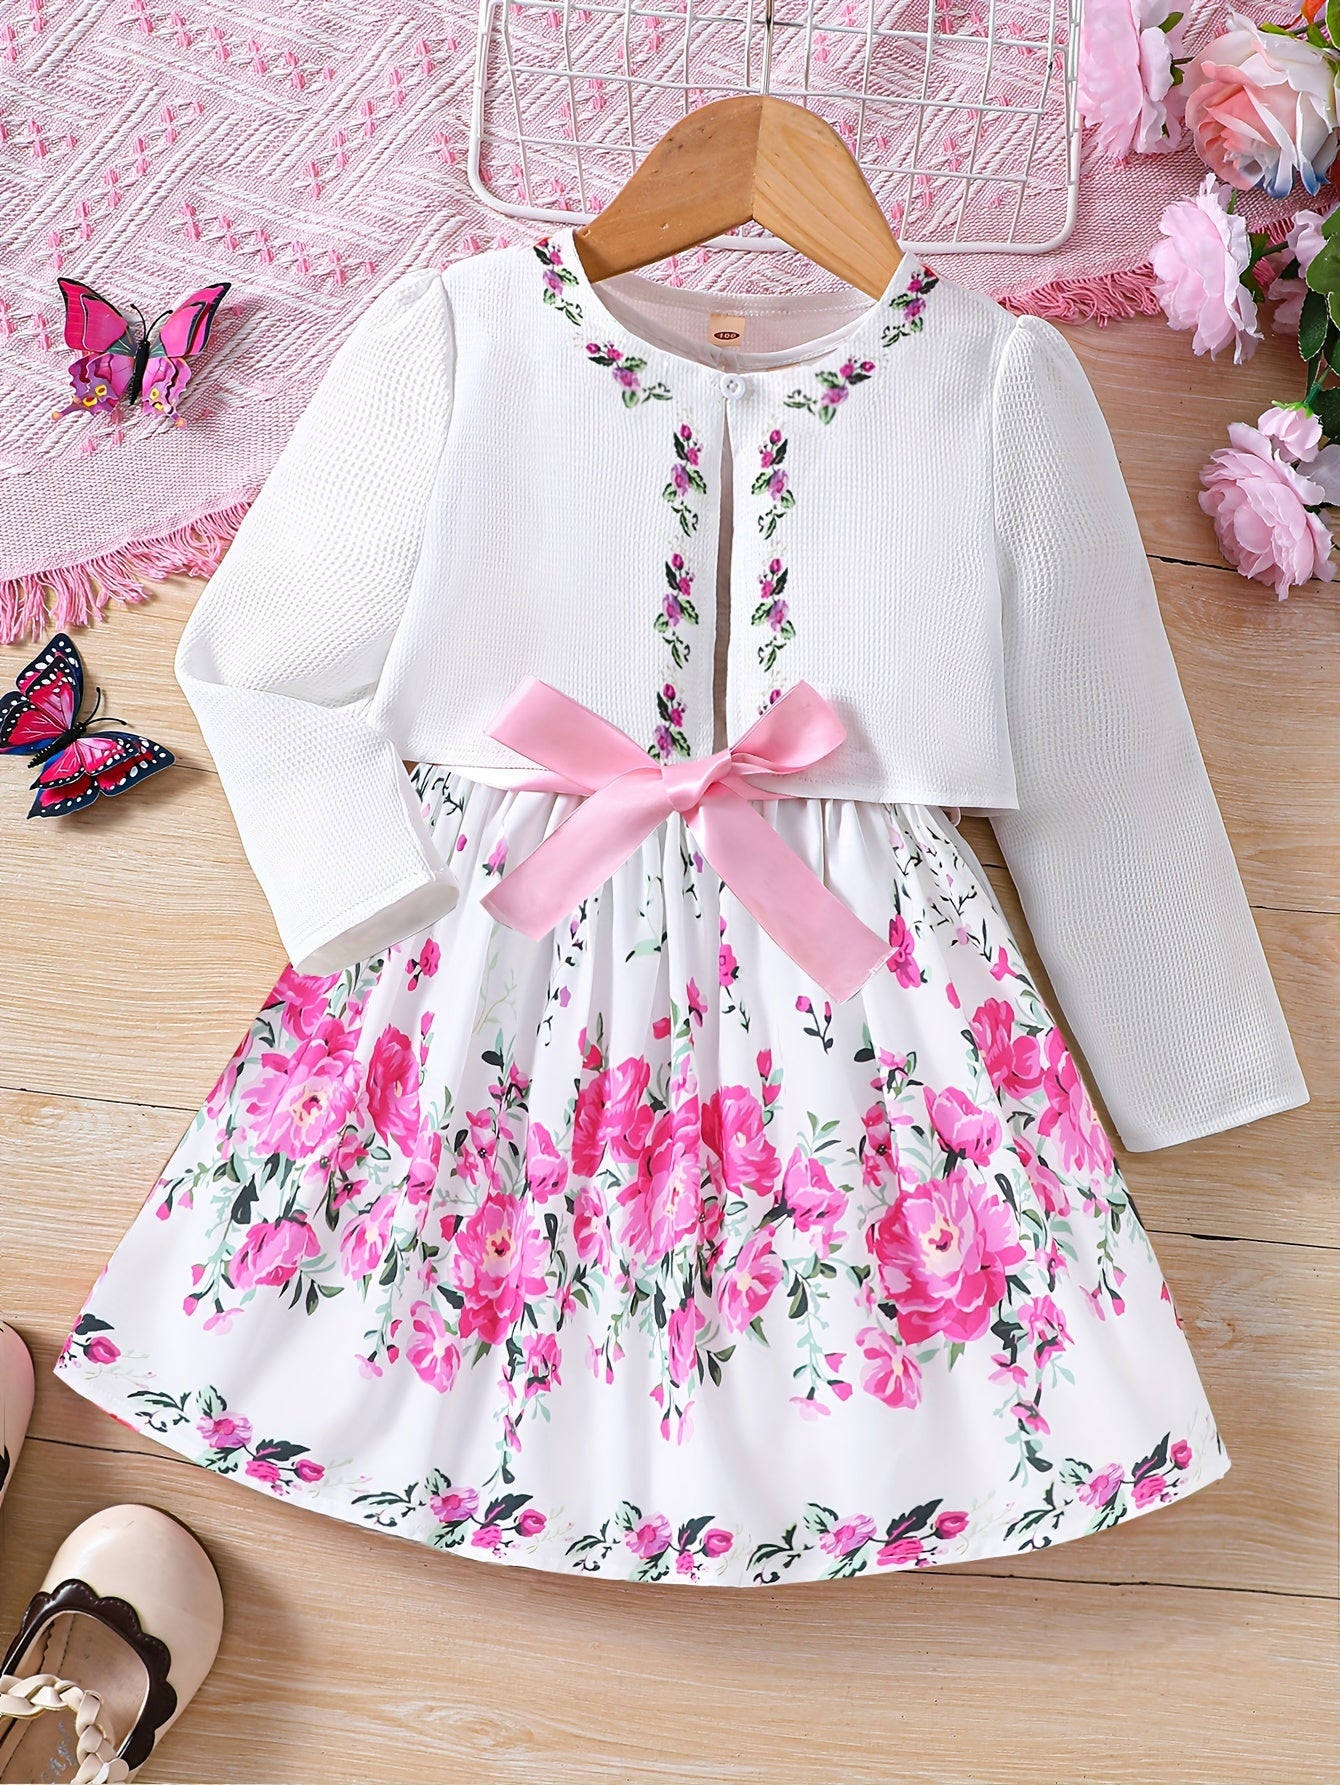 Girls Adorable Long Sleeve Cardigan & Floral Sundress Set - Soft & Stylish Two-piece Outfit for Daily Summer Adventures